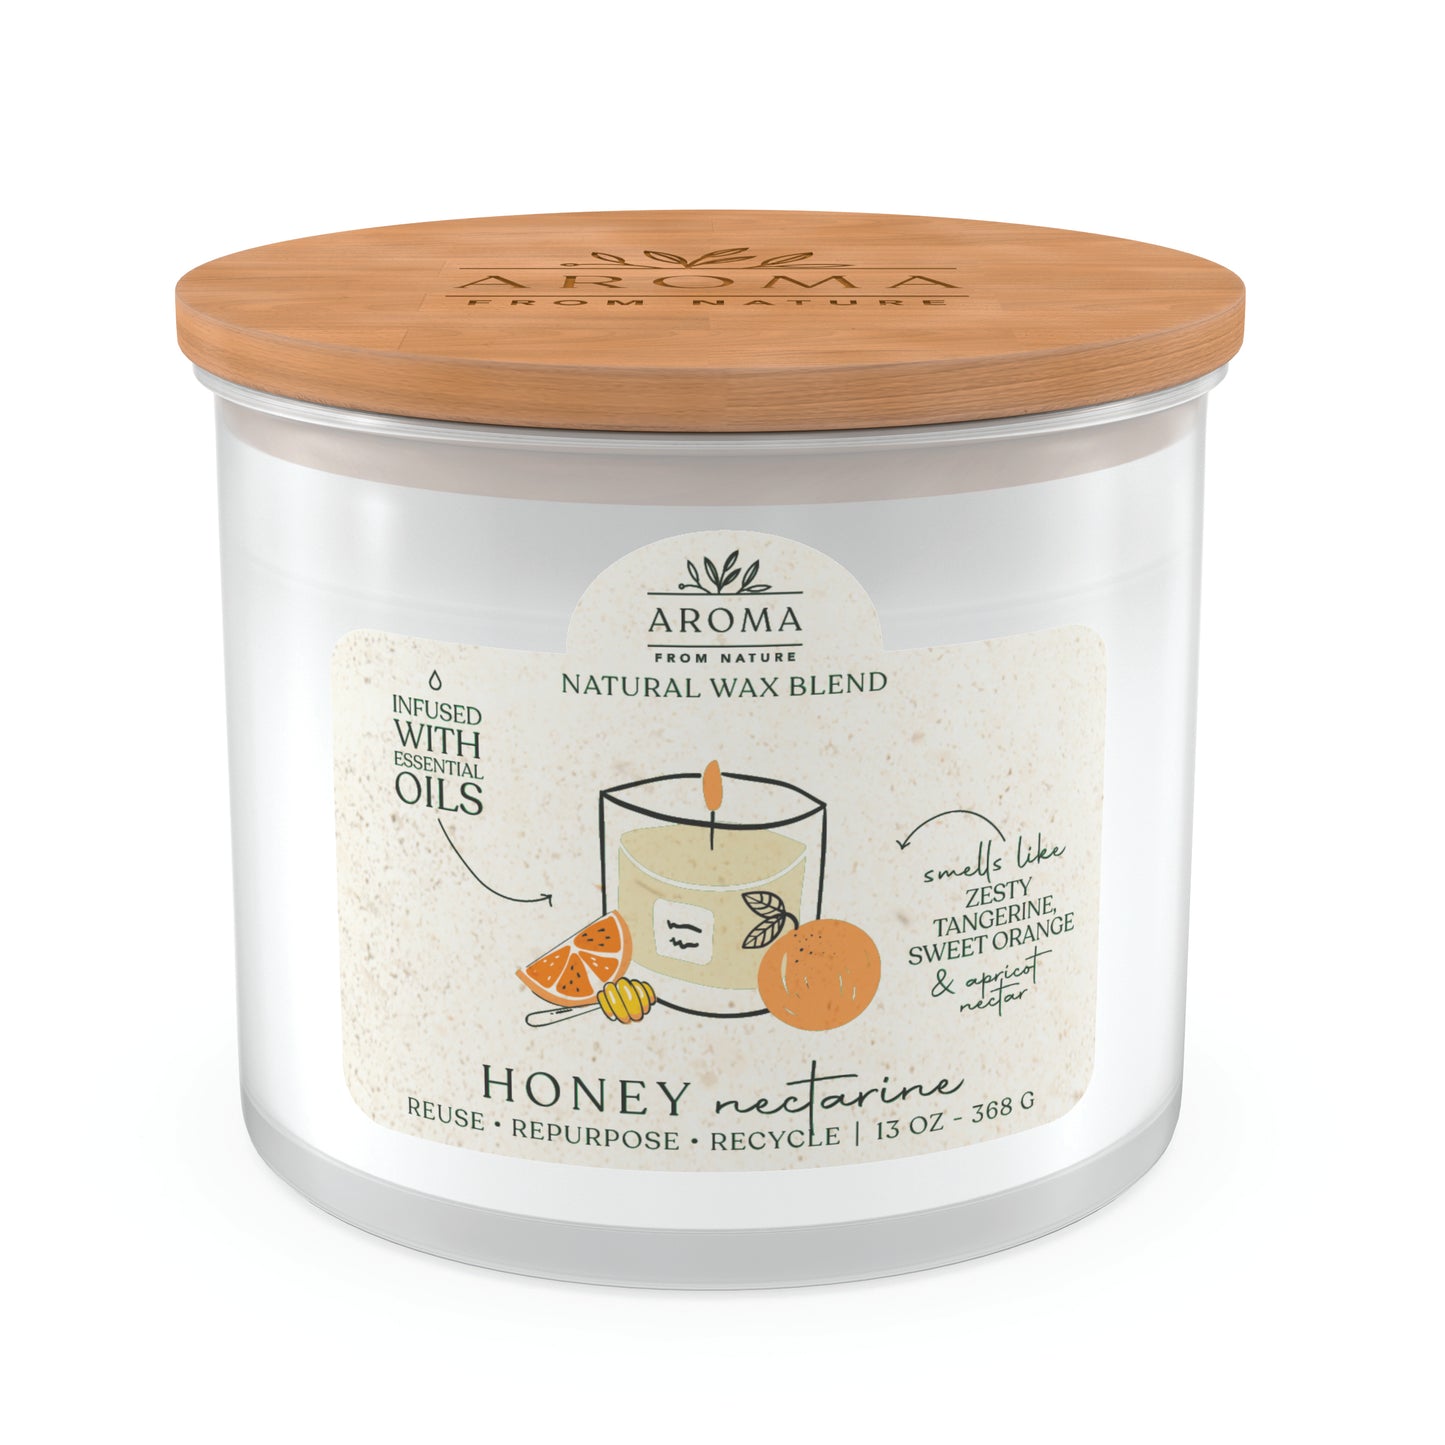 Wood Wick by Aroma From Nature - 13oz Wood Wick Aroma From Nature, Honey Nectarine